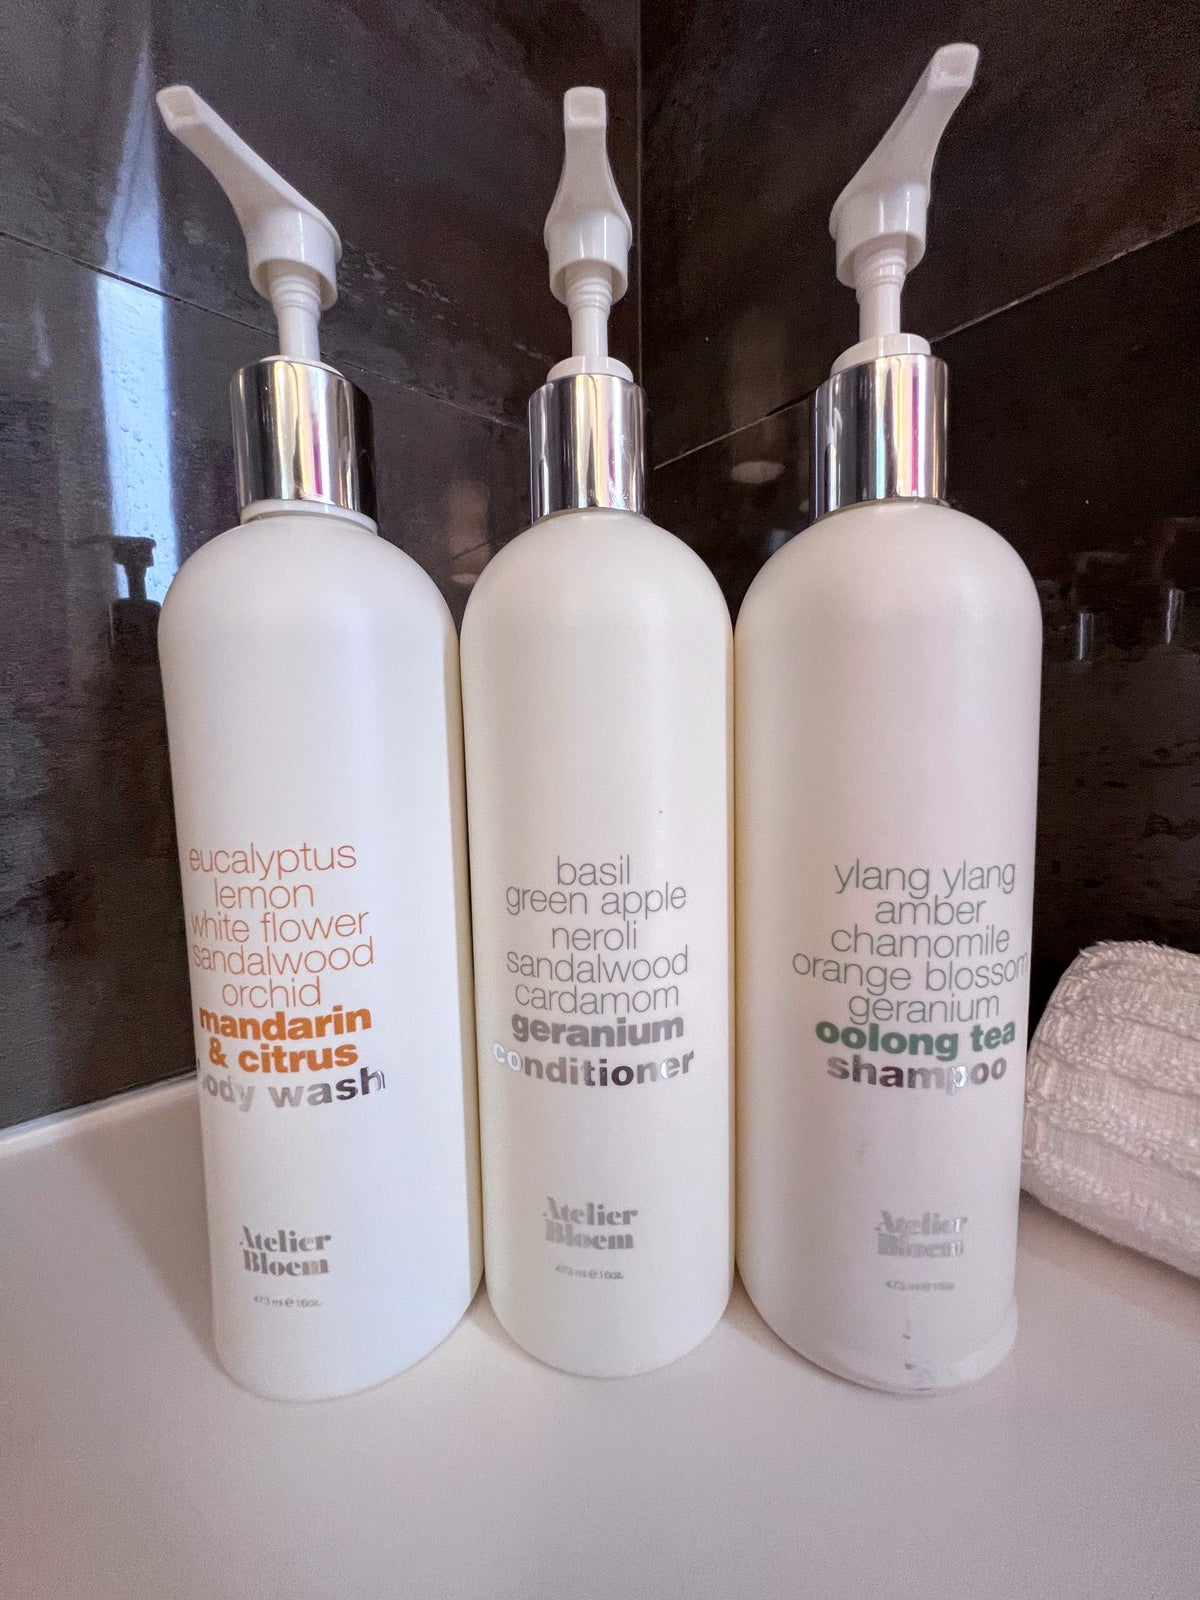 Atelier Bloom shower products at Kimpton Seafire